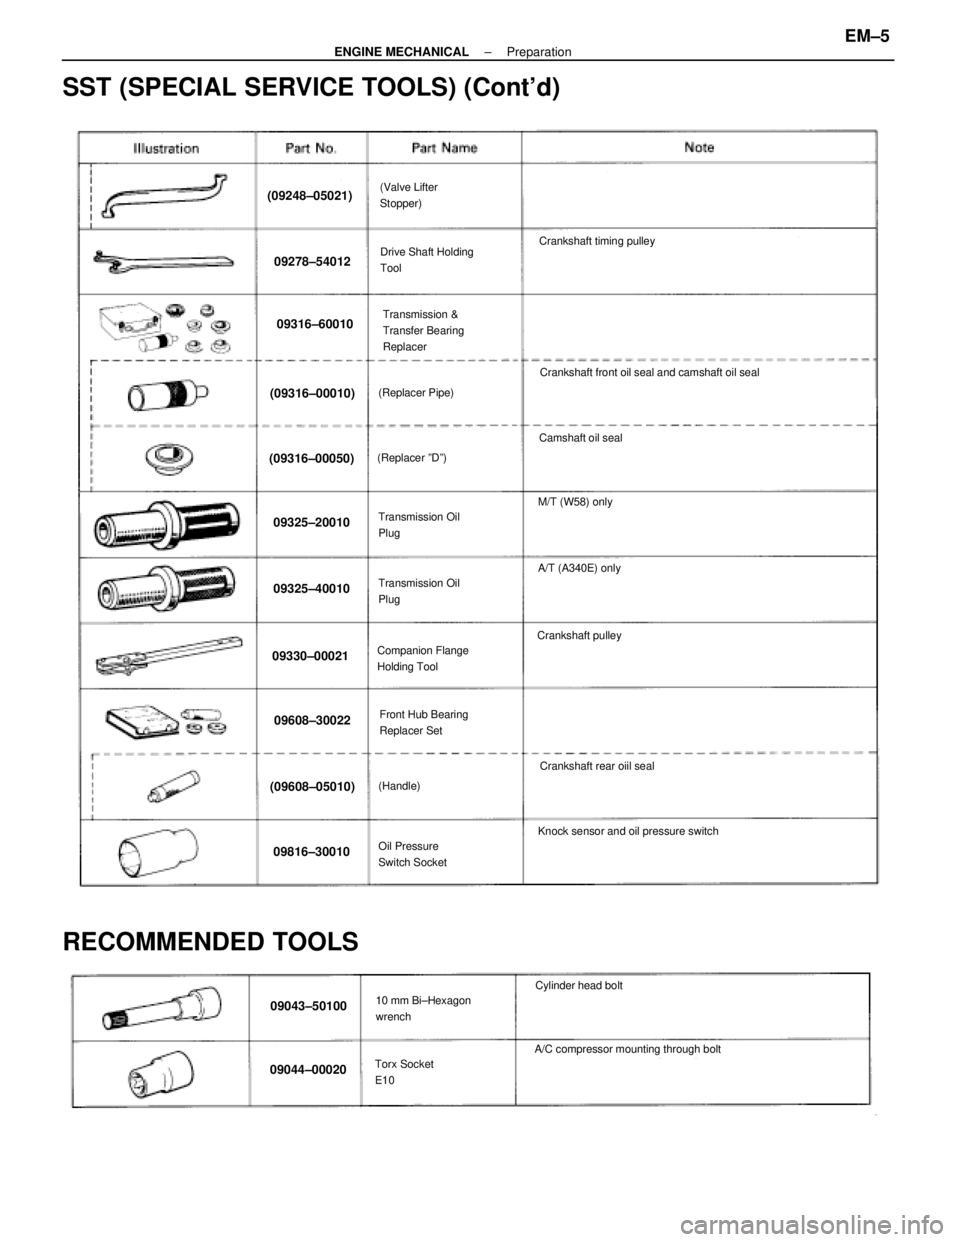 LEXUS SC400 1991  Service Service Manual 
SST (SPECIAL SERVICE TOOLS) (Contd)
(09248±05021)(Valve Lifter
Stopper)
09316±60010Transmission &
Transfer Bearing
Replacer
Crankshaft timing pulley
09278±54012Drive Shaft Holding
Tool
M/T (W58) 